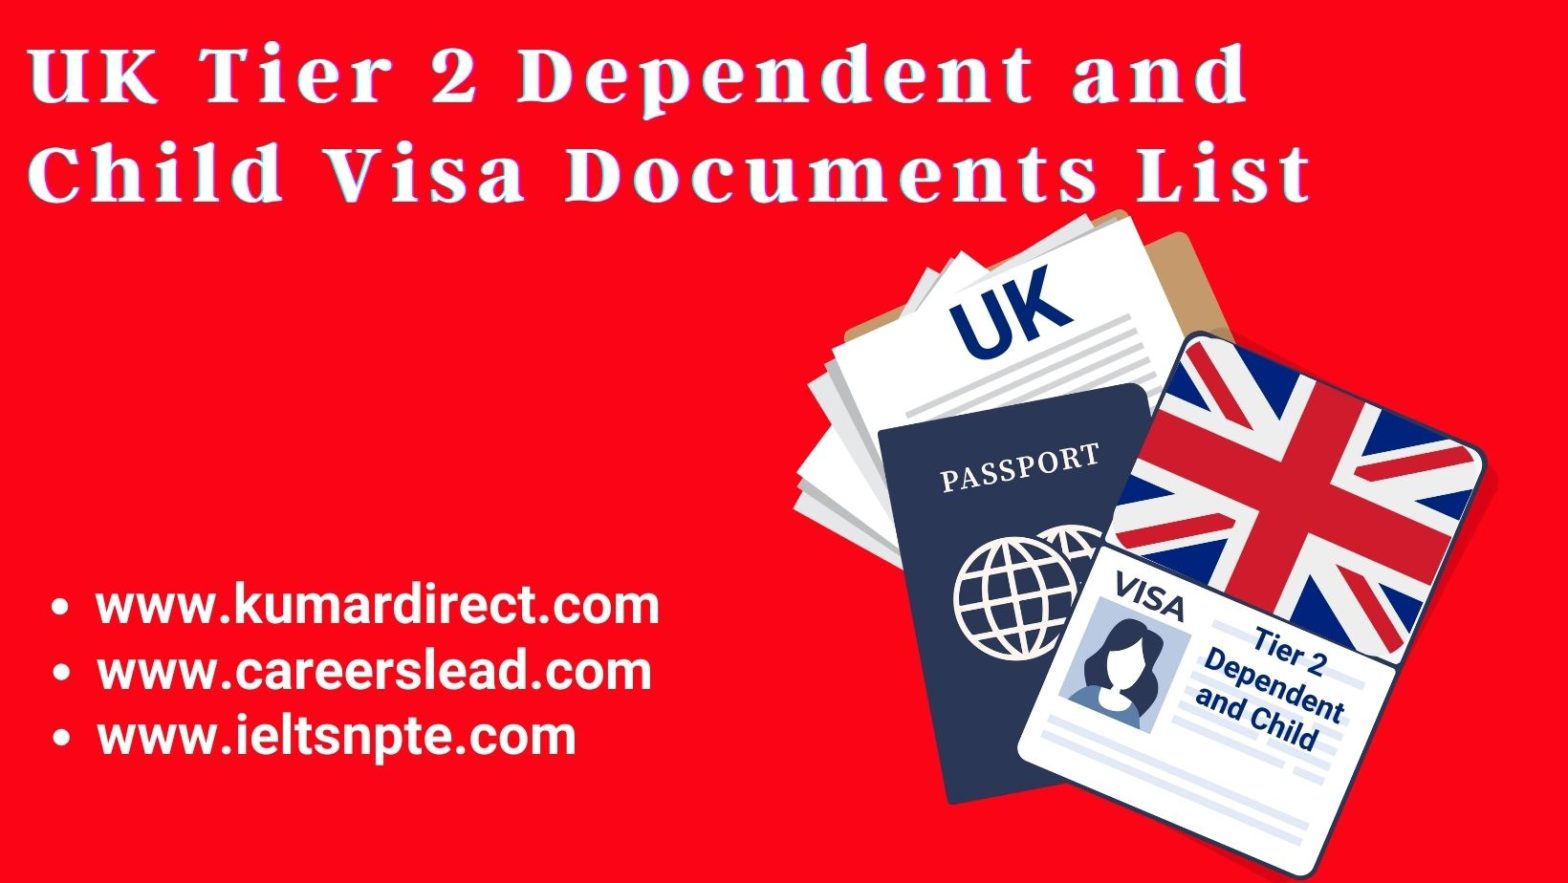 UK Tier 2 Dependent and Child Visa Documents List